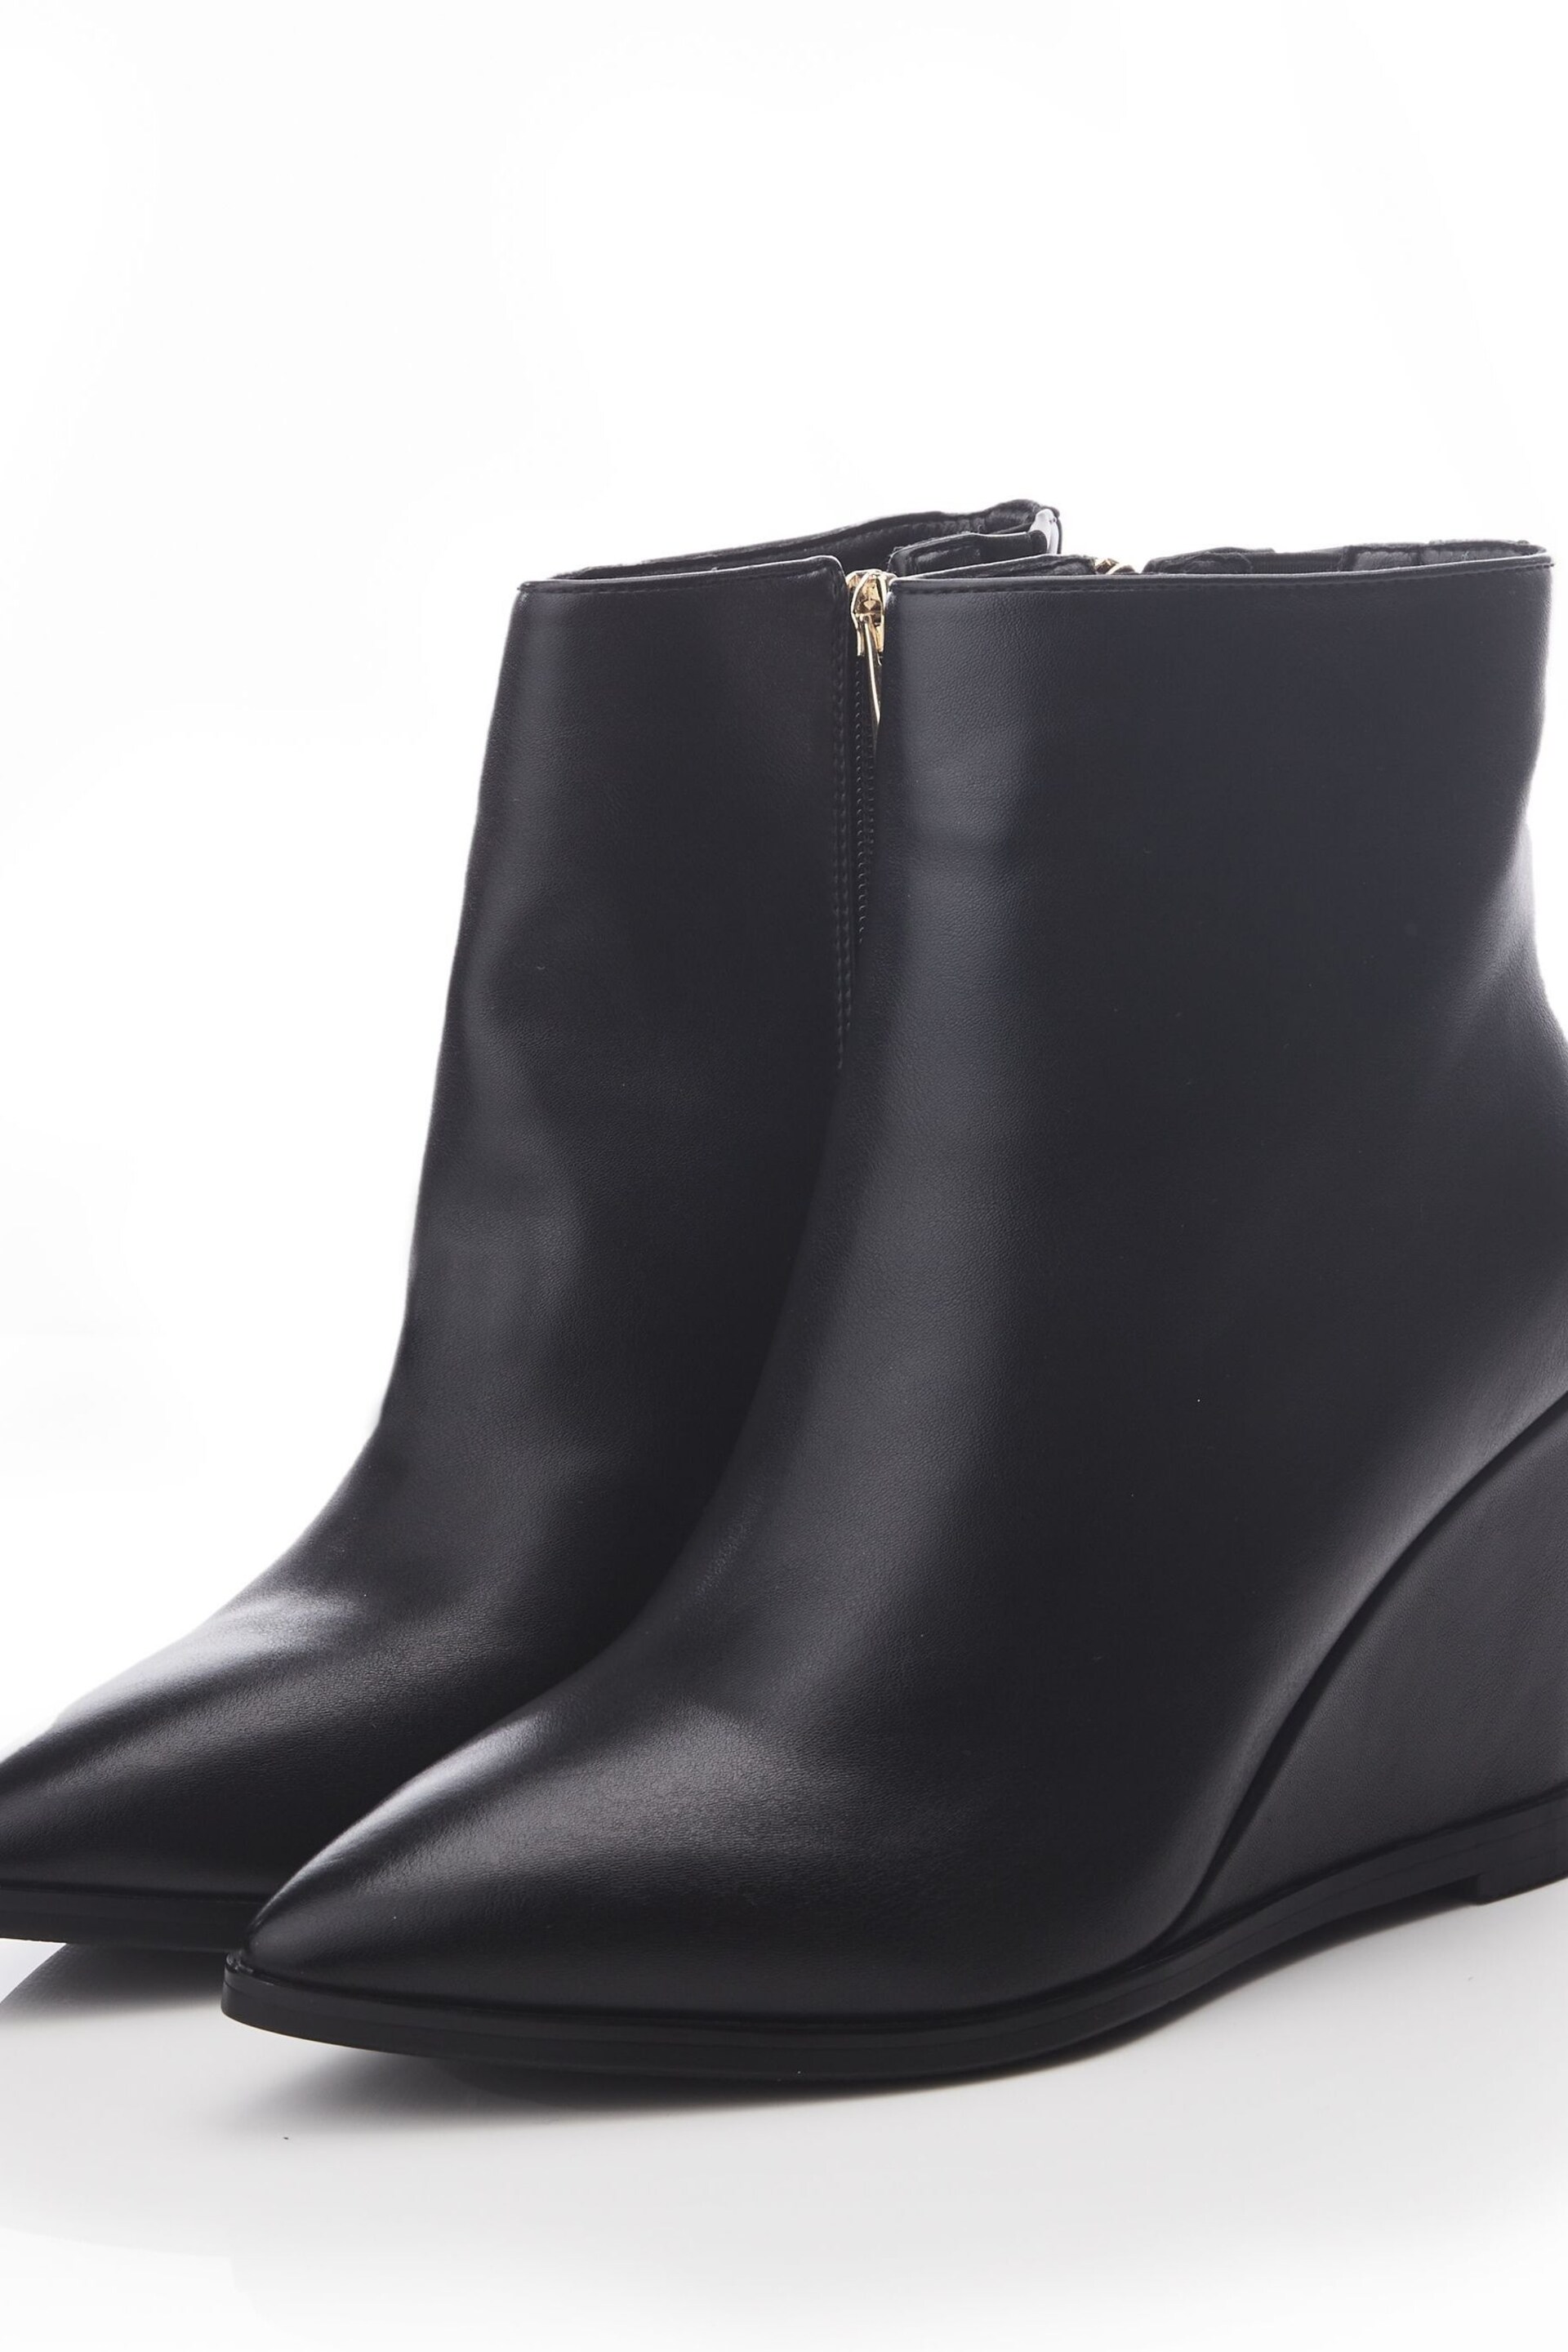 Moda in Pelle Nammie Pointed Toe Wedge Black Ankle Boots - Image 4 of 4